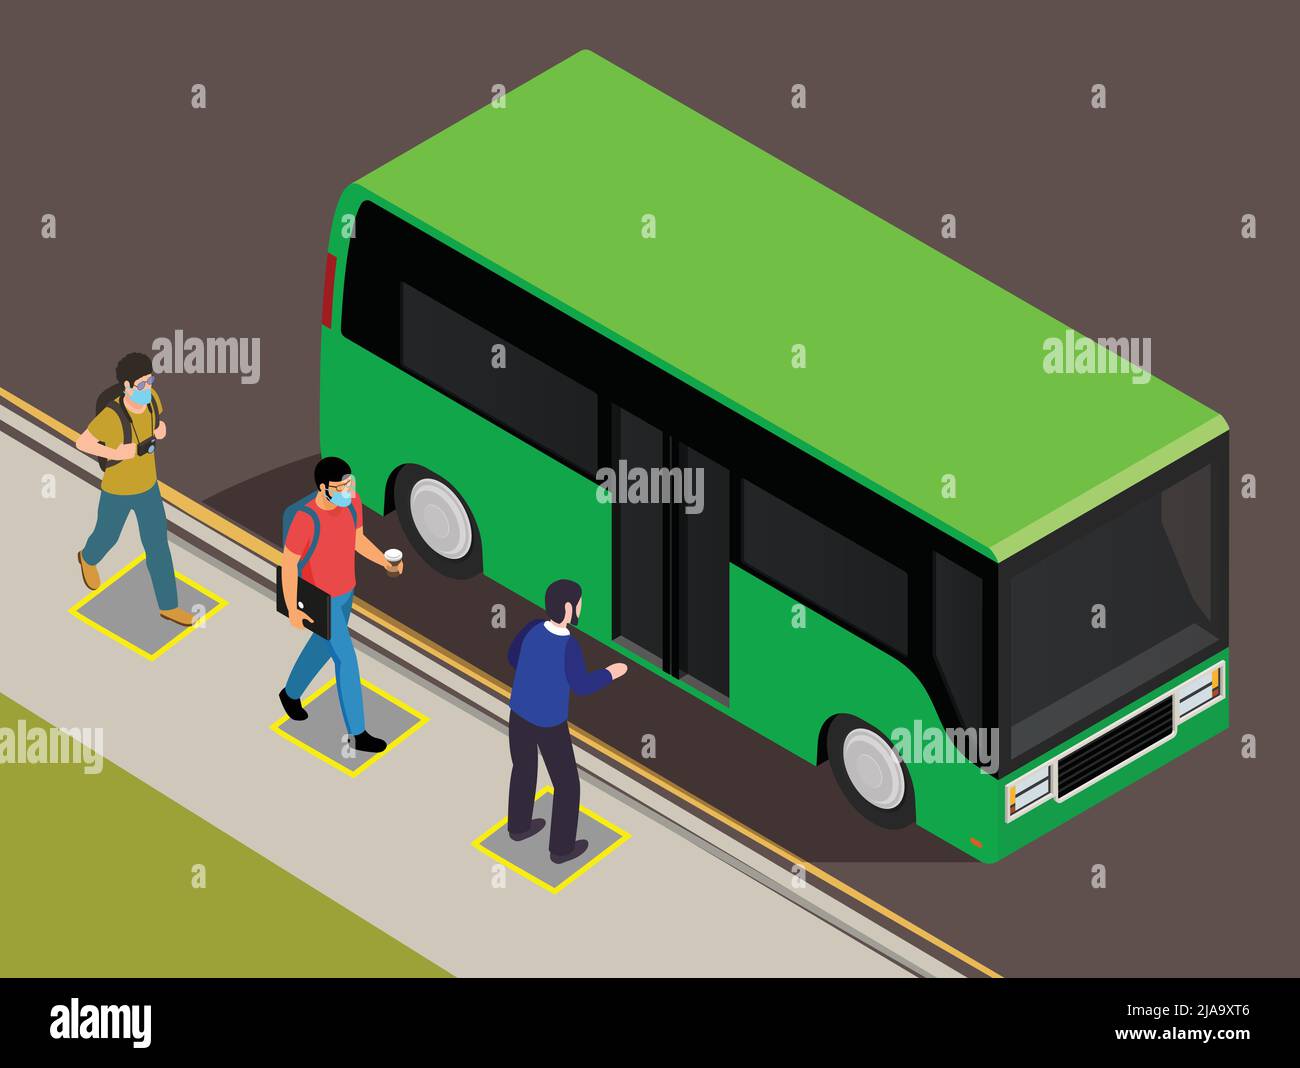 Social distance at public transport. Poster for maintain social distance at office travel bus. Travel poster for covid 19 virus. People are travel in Stock Vector